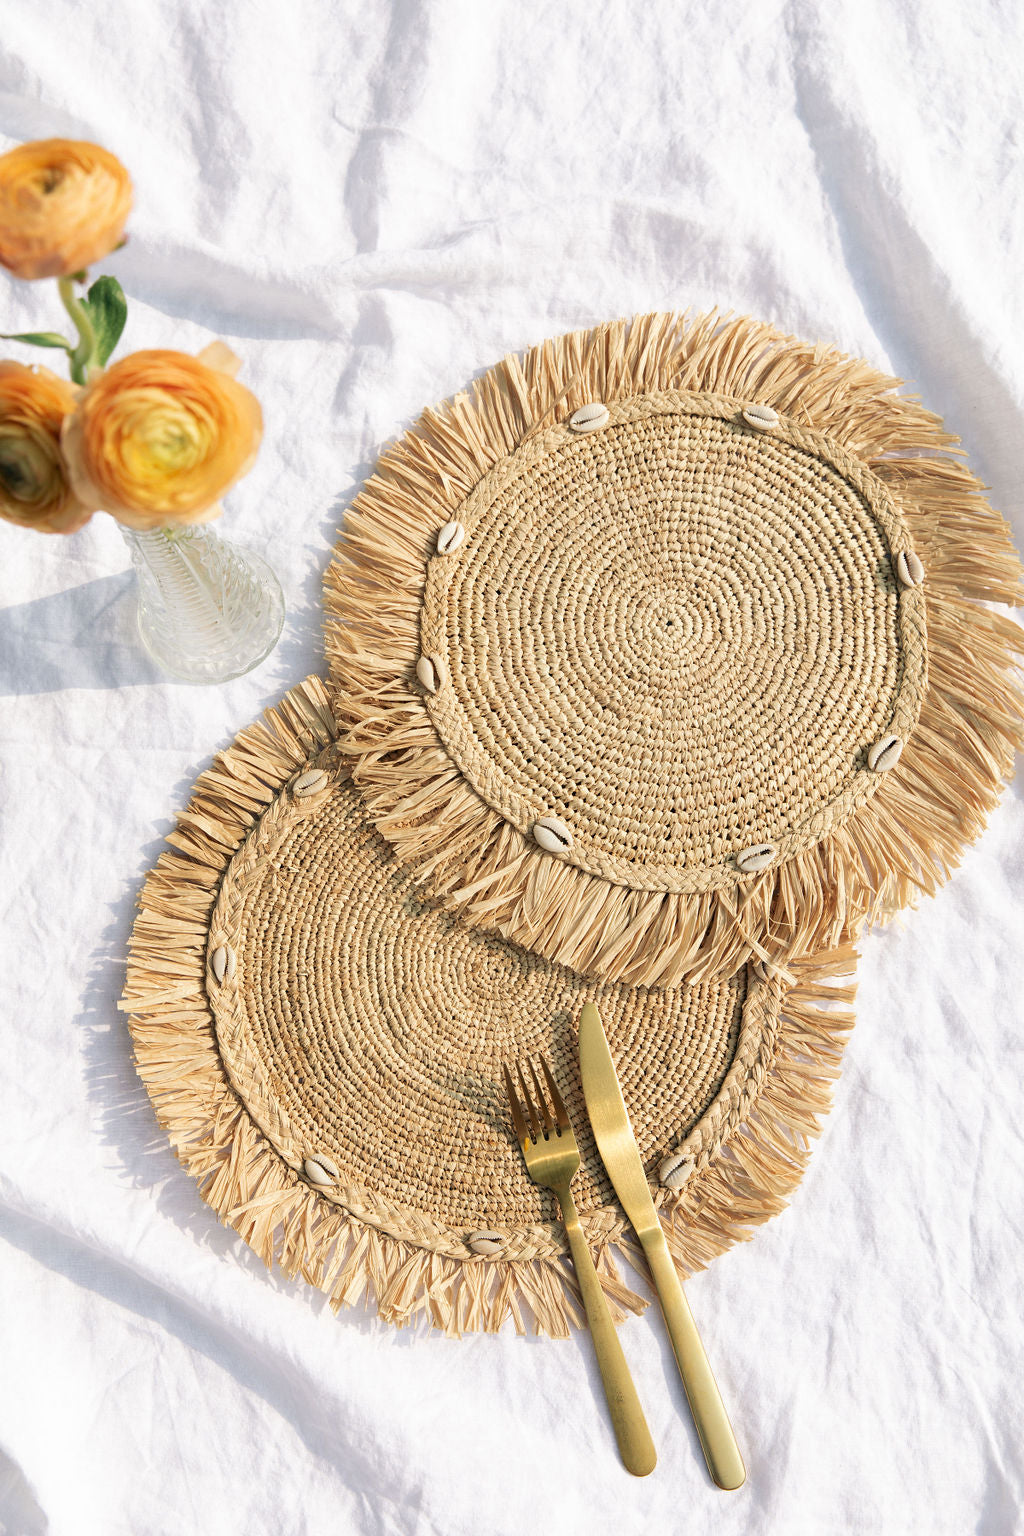 Natural Raffia Placemats, Boho Placemats, Fringe Placemats, Raffia  Placemats & Table Charger,placemats for Round Table,handwoven Raffia Mats 